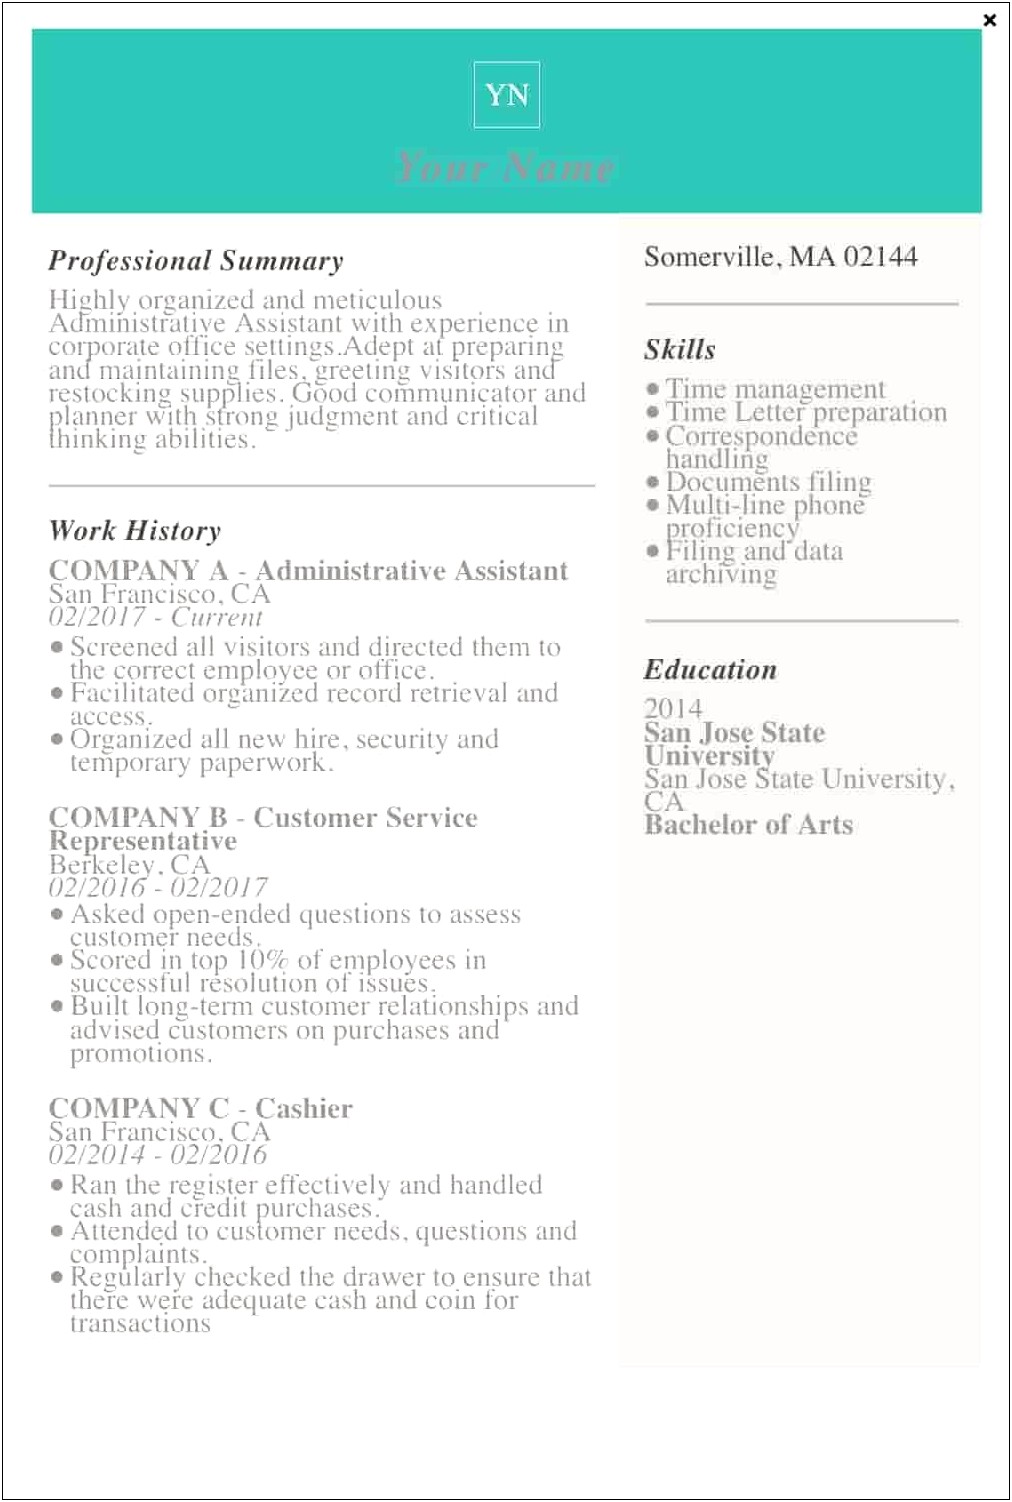 Master Degree Admission Resume Template With Summary